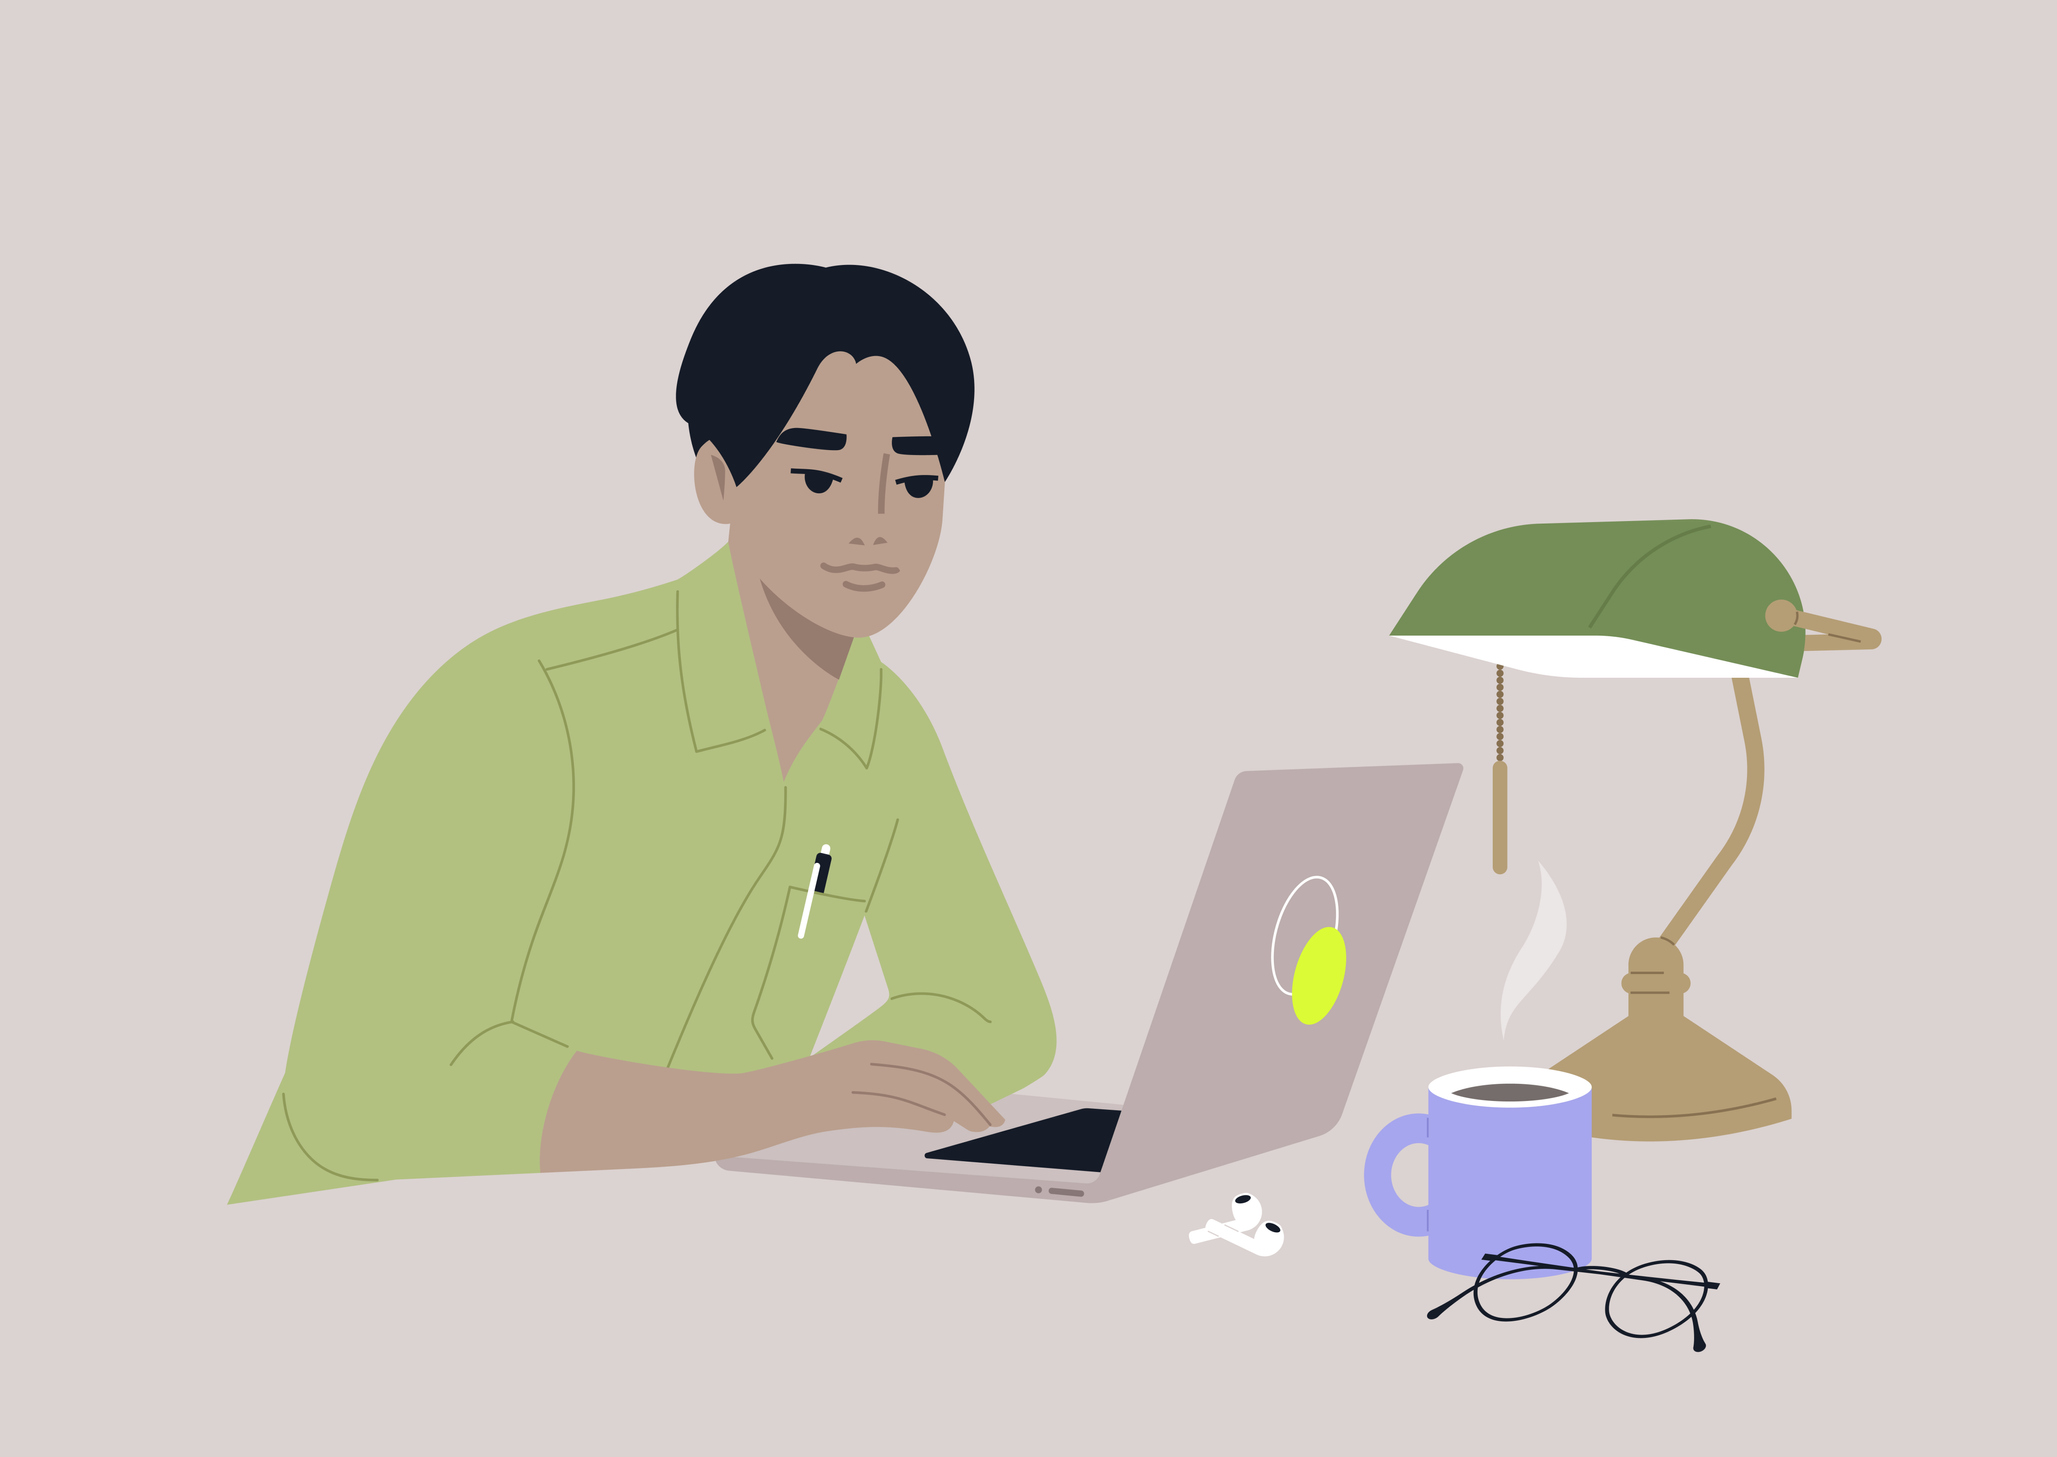 A young male Asian character working in a library, a green glass vintage lamp sitting on a desk